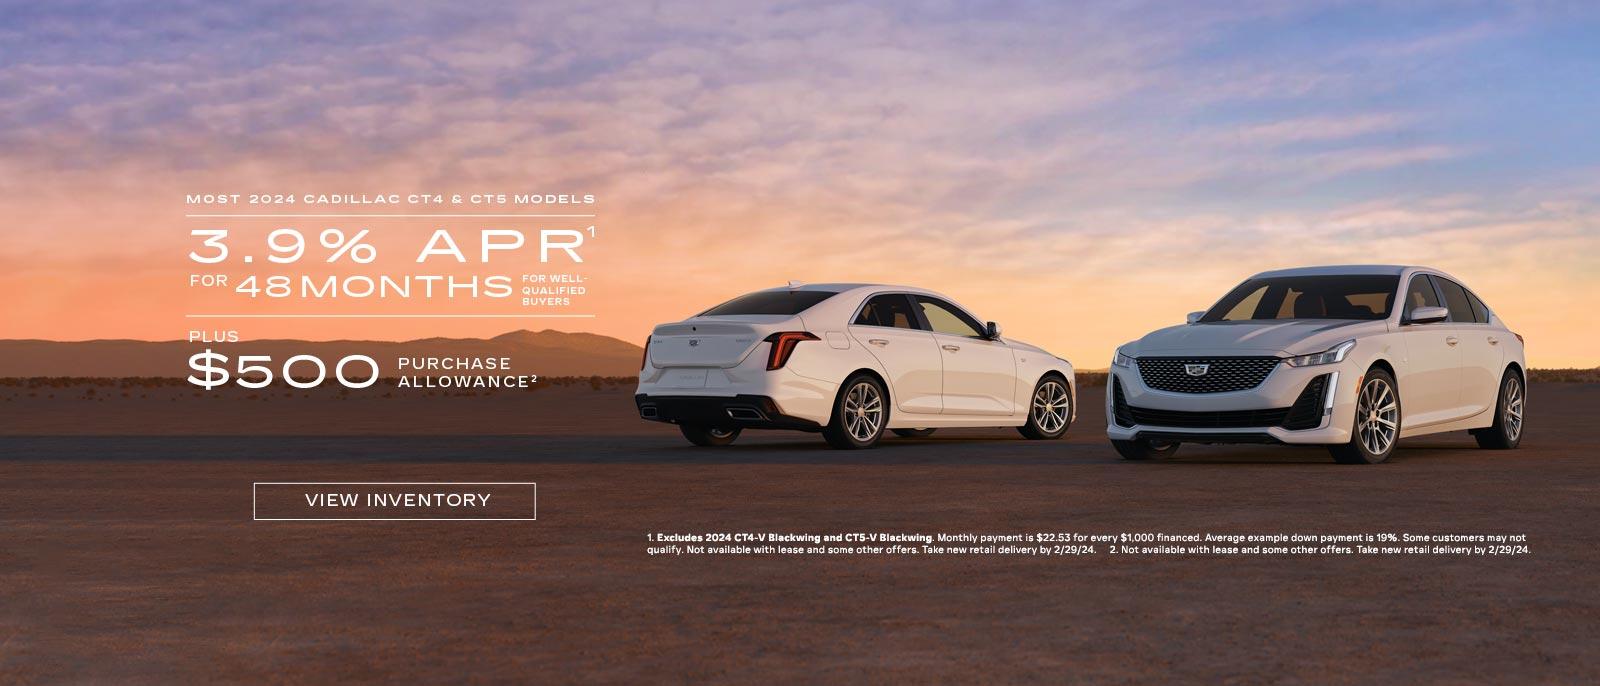 Most 2024 Cadillac CT4 and CT5 models. 3.9% APR for 48 months for well qualified buyers. Plus $500 Purchase Allowance.